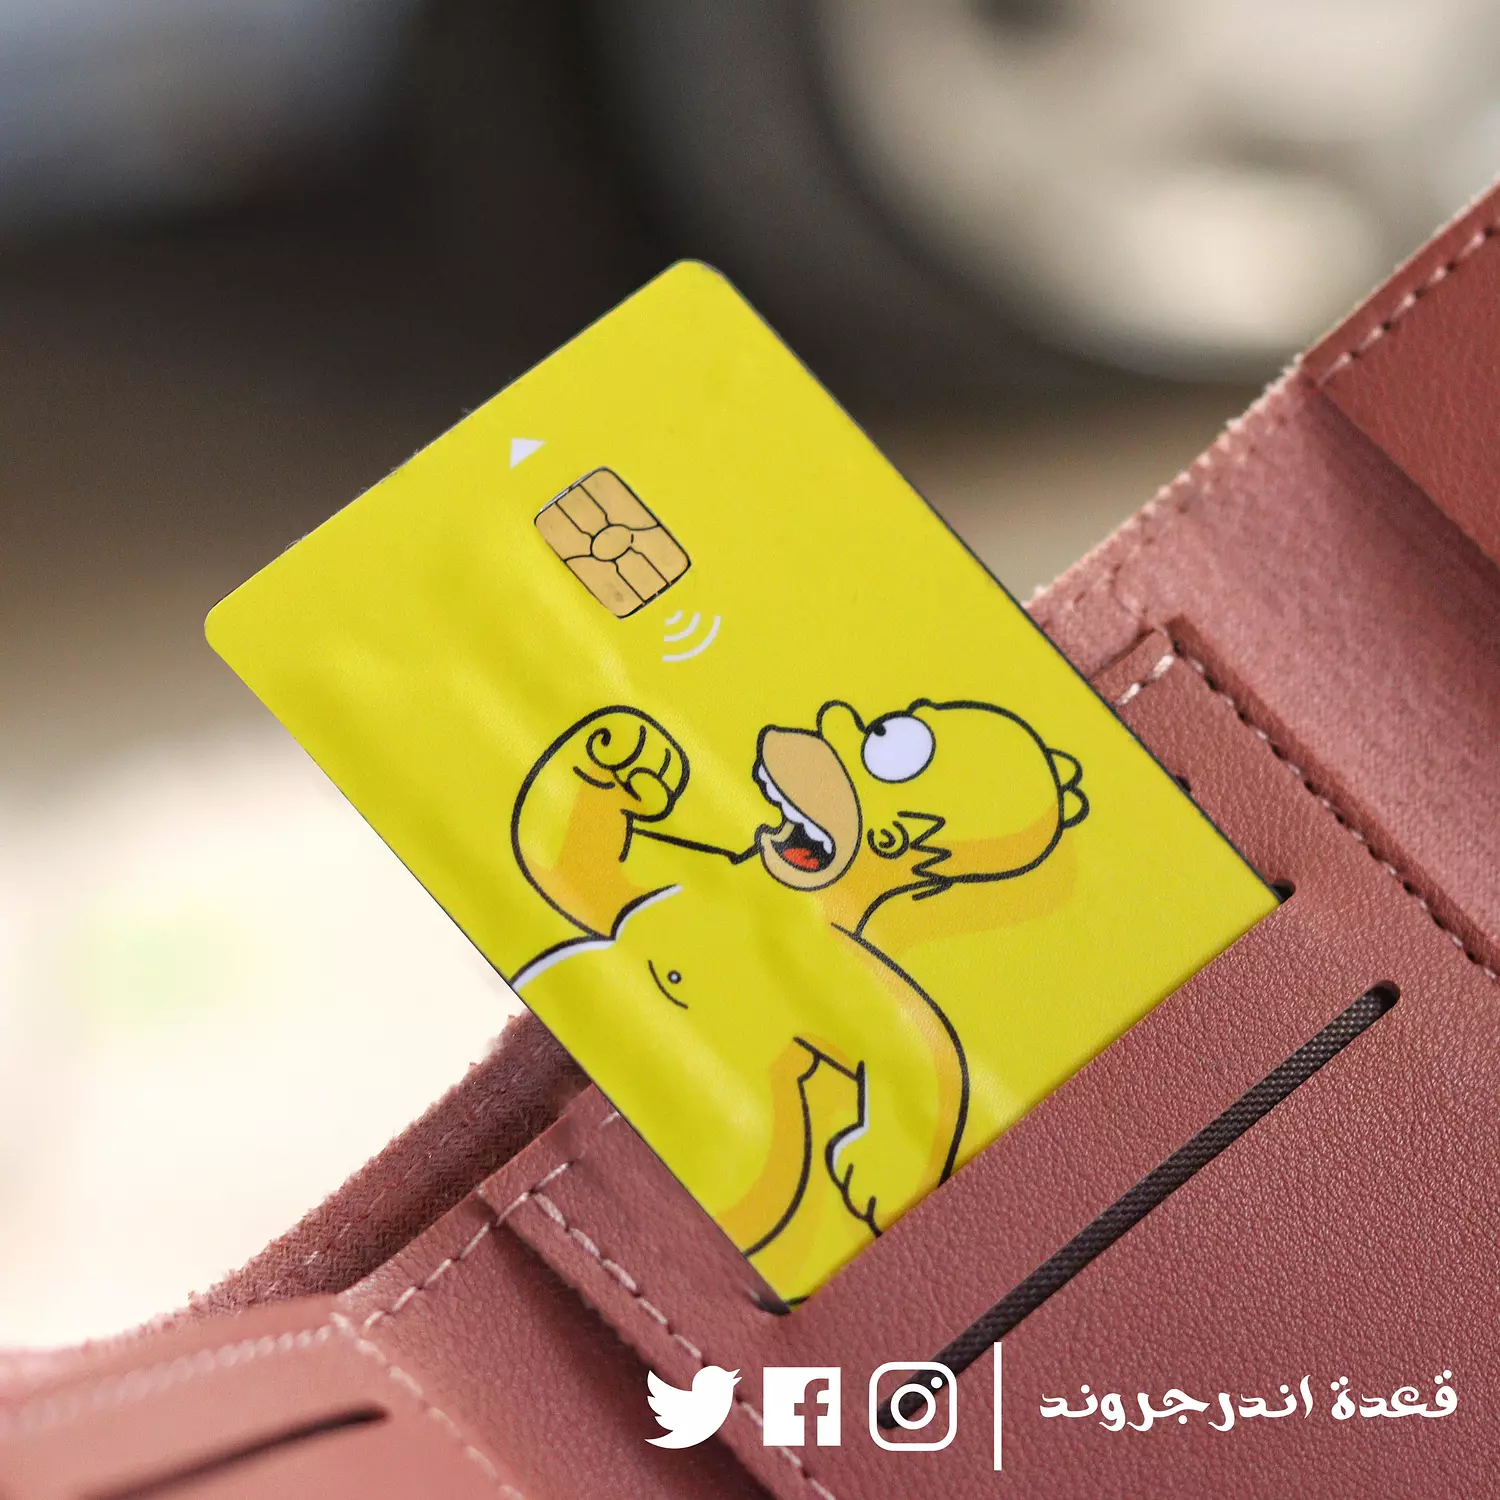 Visa Sticker - The Simpsons  hover image